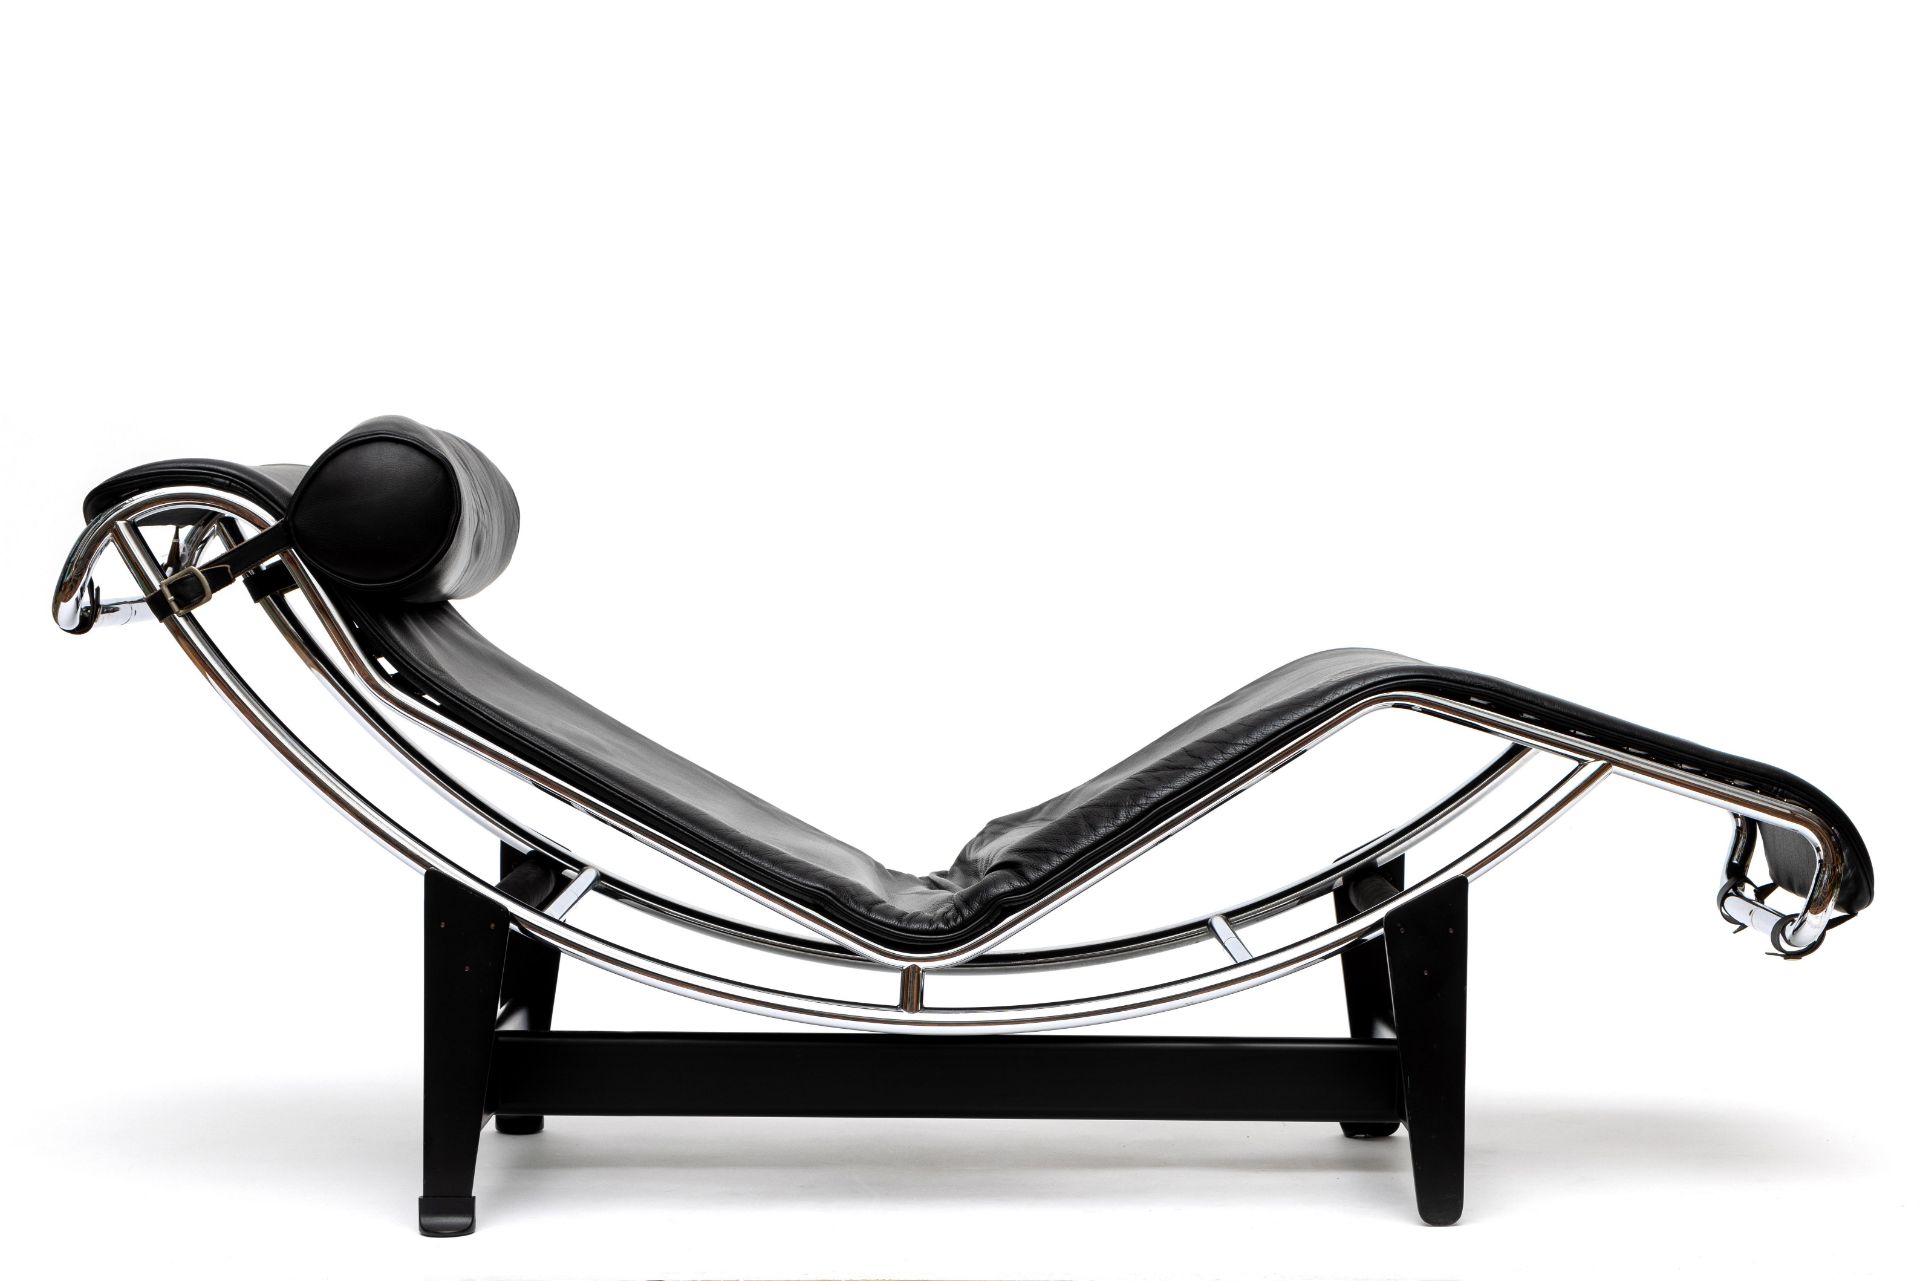 Le Corbusier, Pierre Jeanneret & Charlotte Perriant voor Cassina, Italië, 'LC4' chaise longue, ontwe - Image 3 of 3